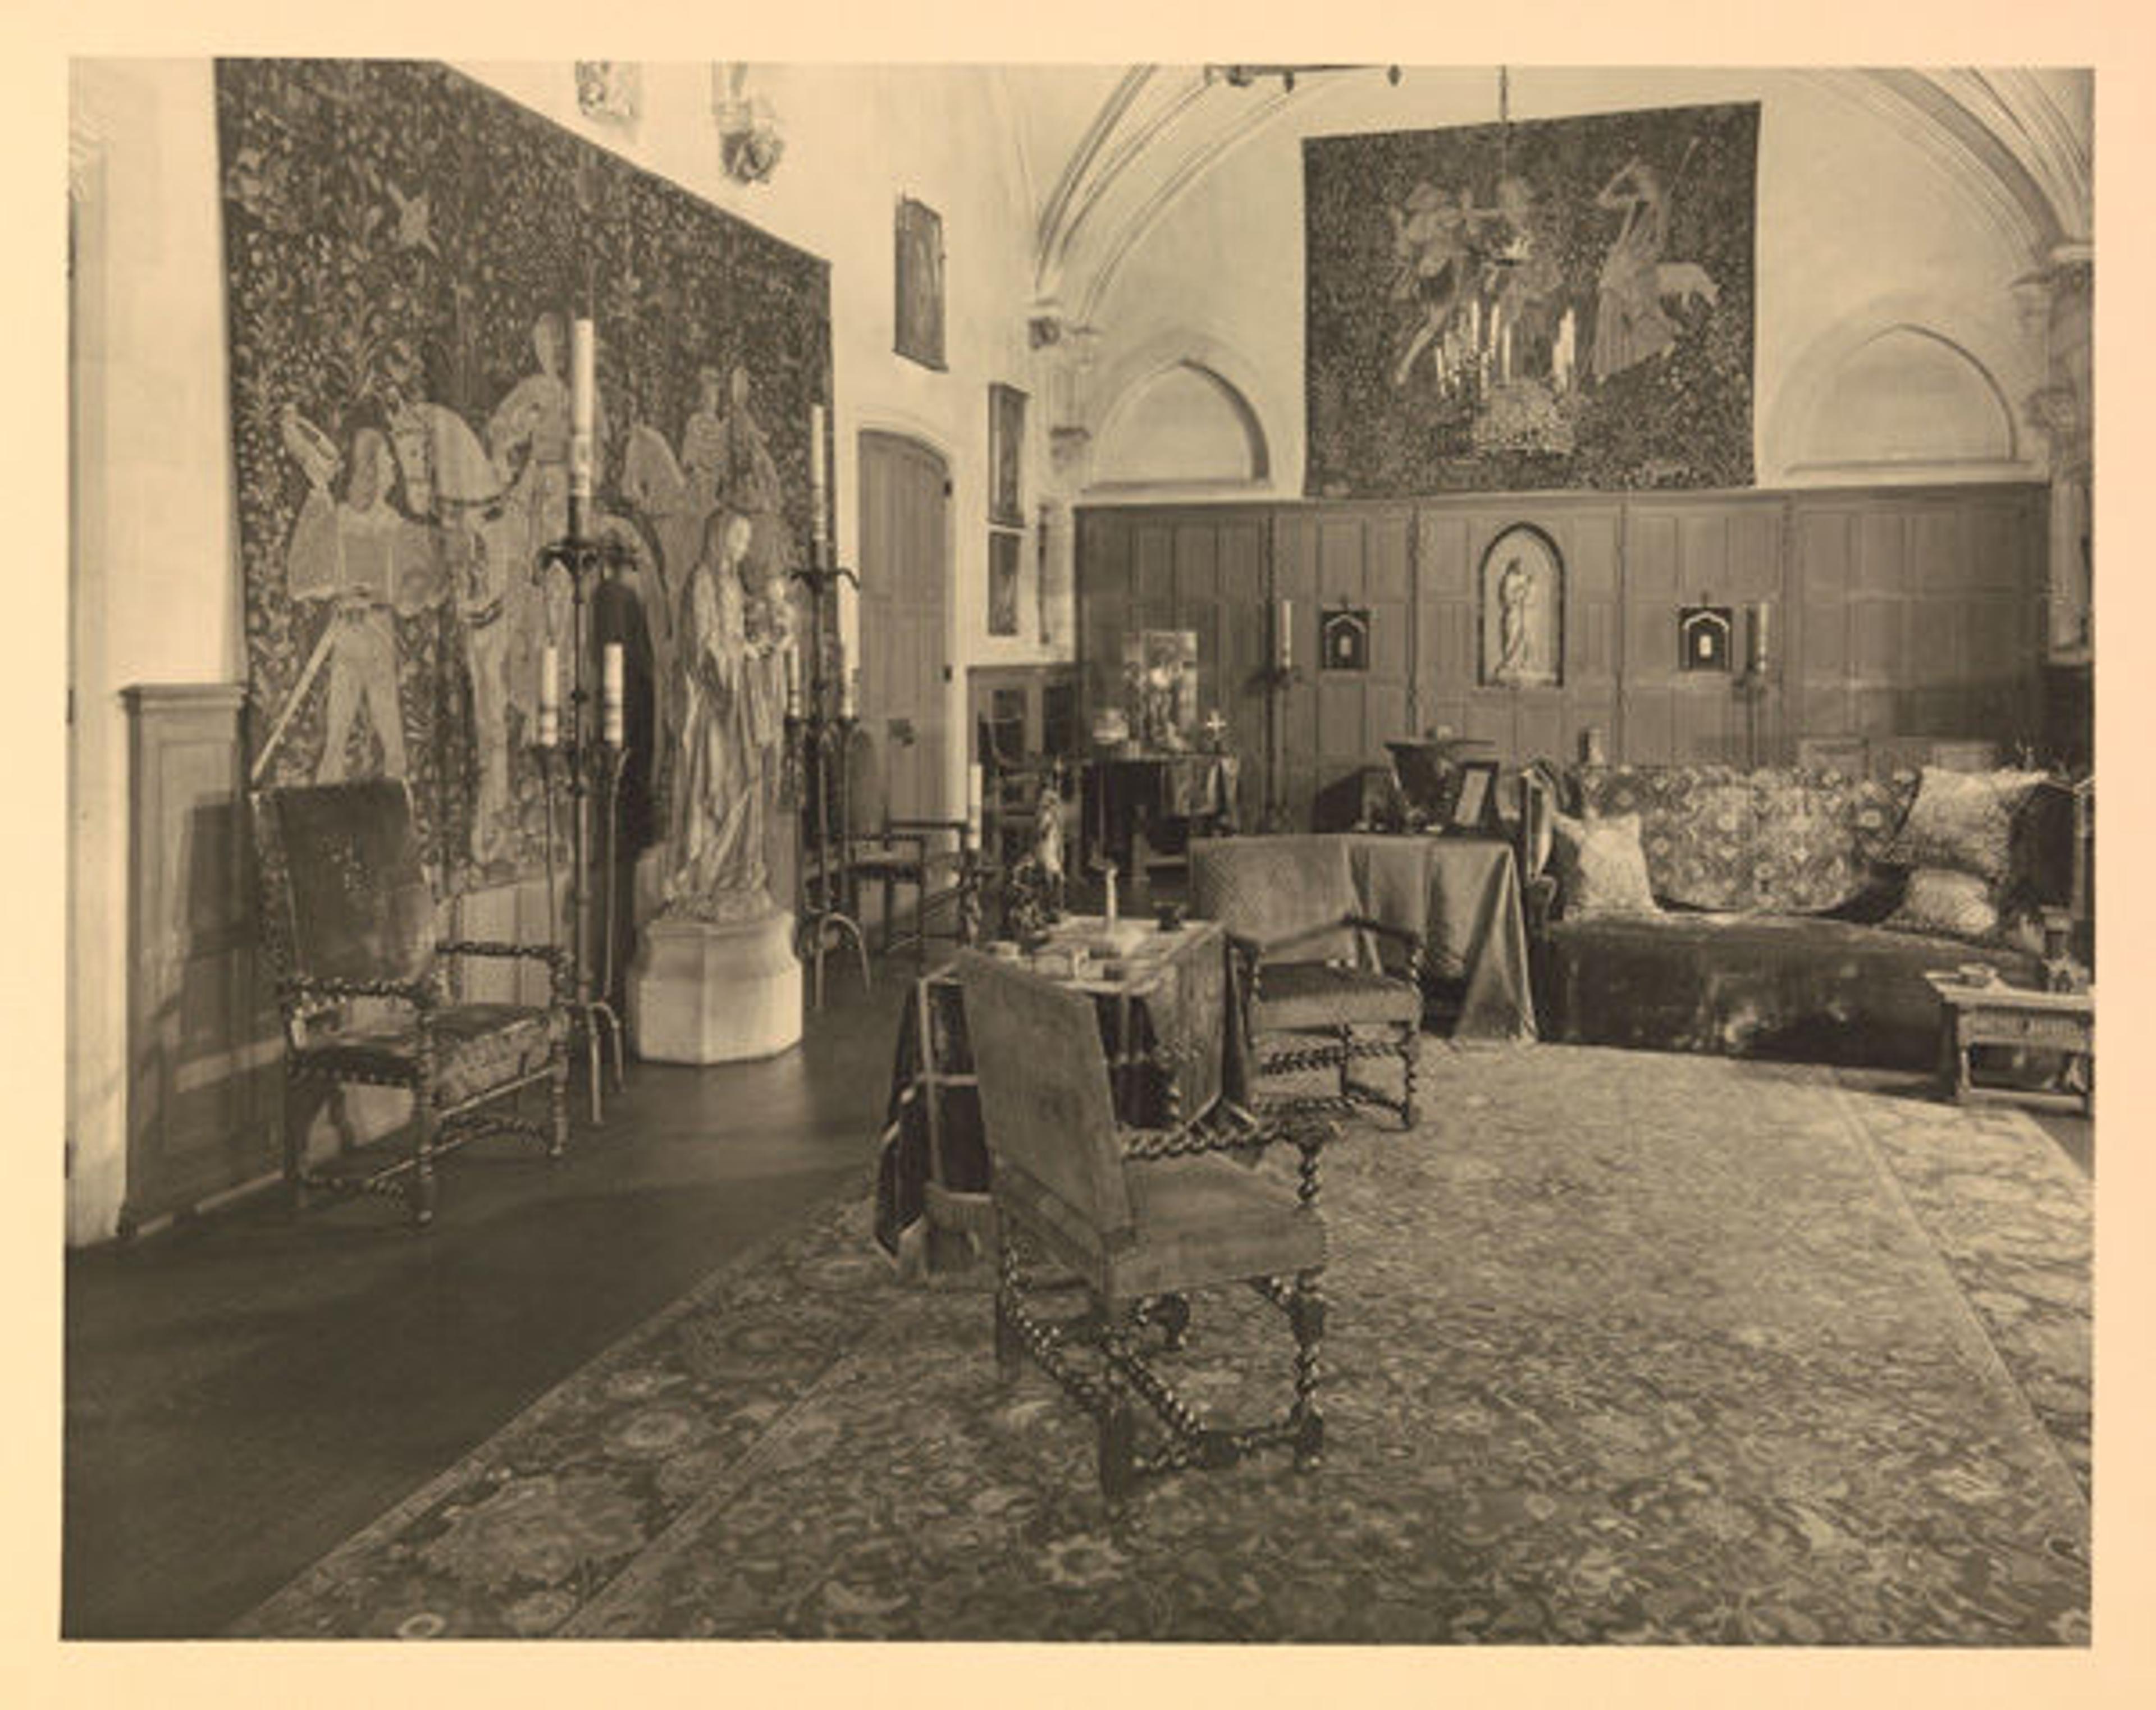 View of the Scenes from the Lives of Abraham and Isaac tapestry-woven cushion covers being used as throw pillows in the Blumenthal household. From the album The Home of George and Florence Blumenthal, Fifty East Seventieth Street, New York, 192-?. The Metropolitan Museum of Art, New York, Watson Library (106.1 B622 F)